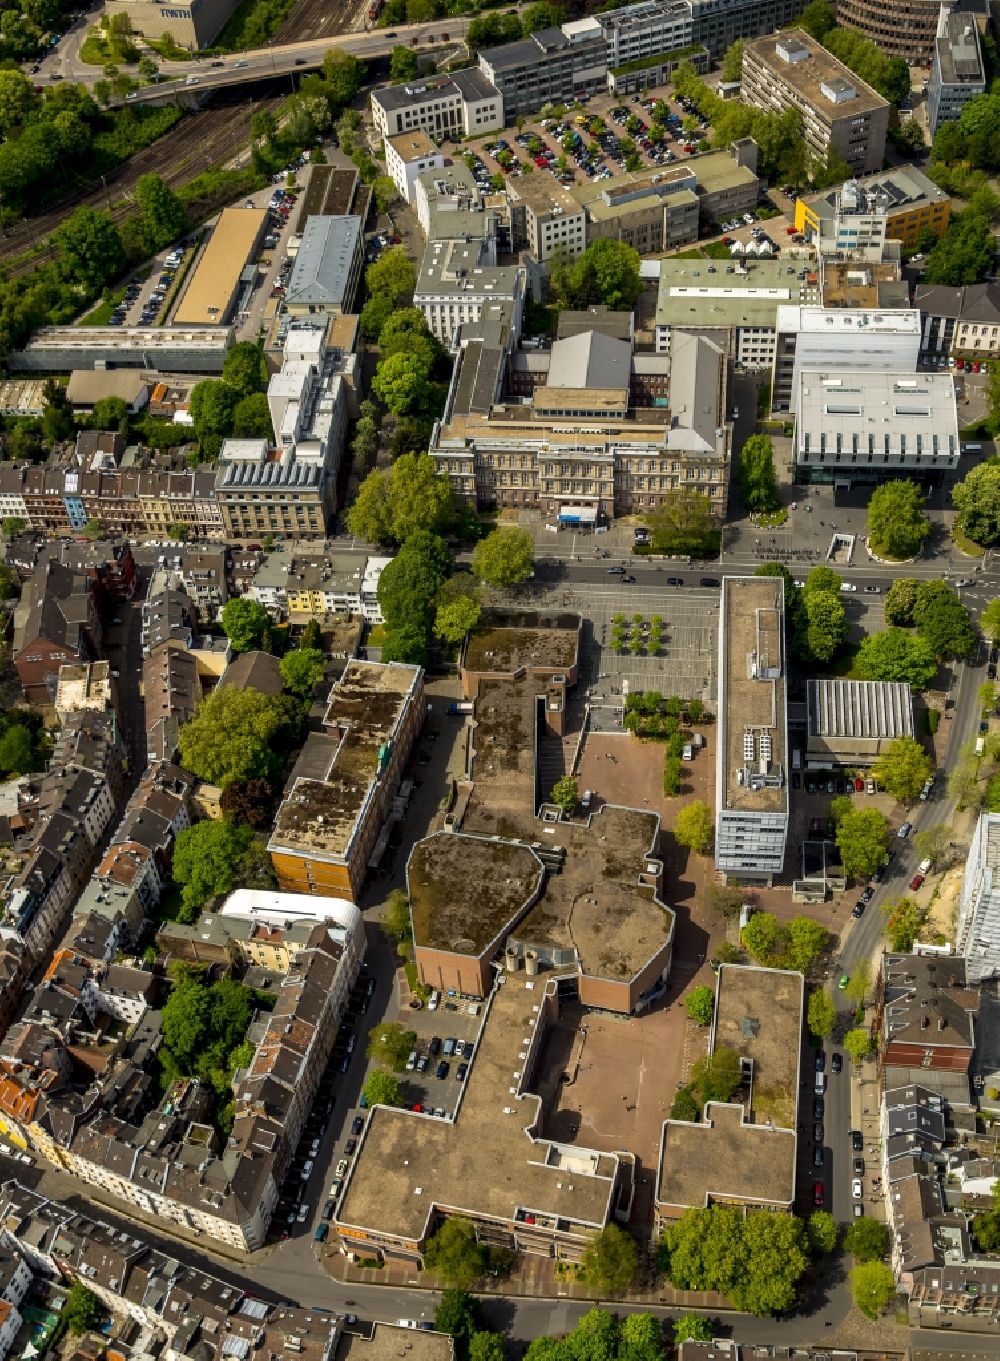 Aerial photograph Aachen - Main area of RWTH-University (Rheinisch-Westfaelische Technische Hochschule Aachen) of Aachen in the state of North Rhine-Westphalia. Aachen is a spa town, diocesan town and the western-most major city of Germany. The main area includes the historic main building and the large complex opposite it, which includes a large number of auditoriums such as Karman-Auditorium